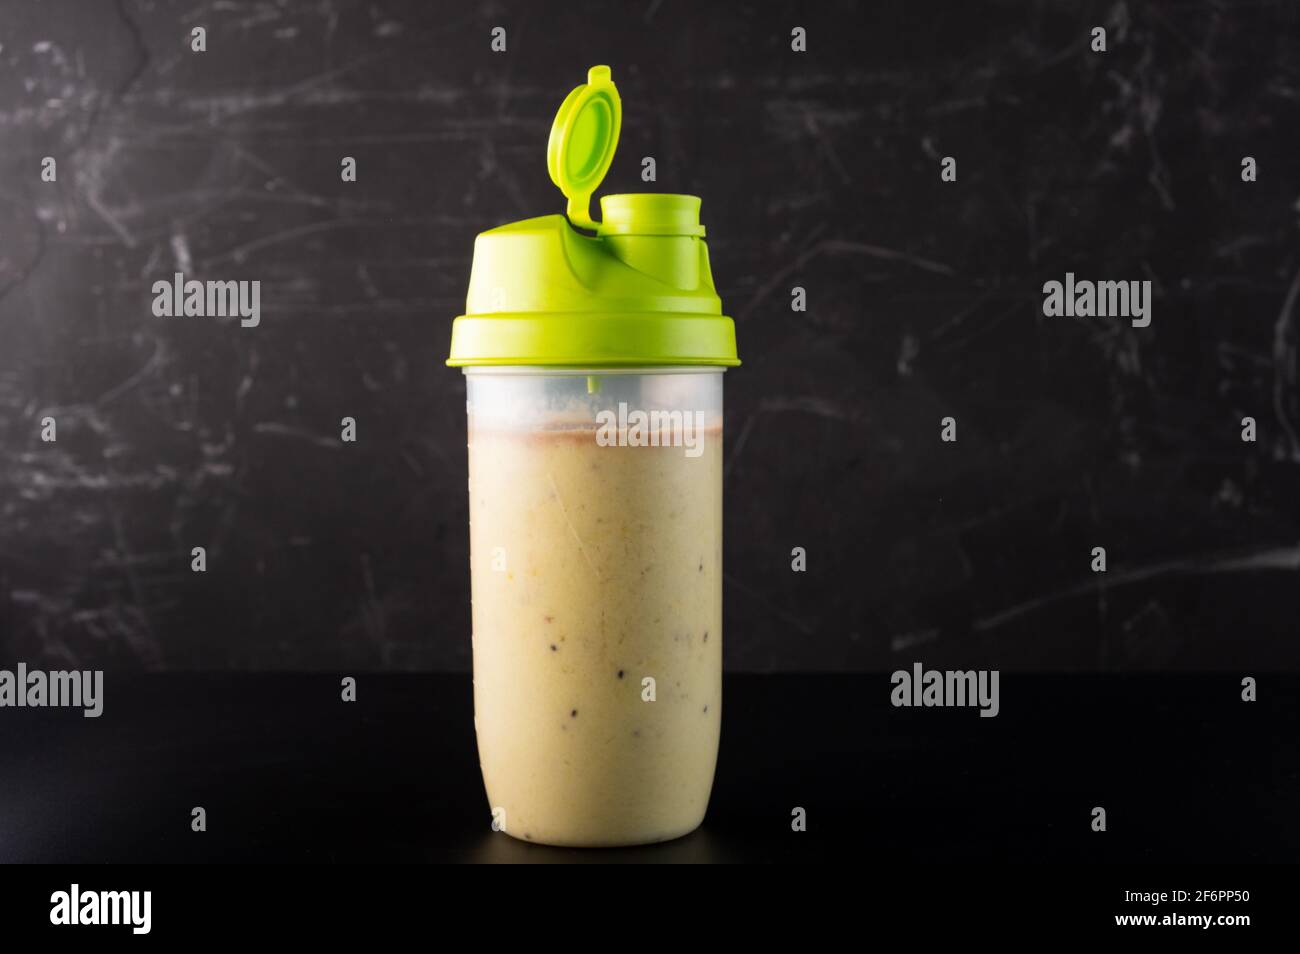 Shaker with fruit and protein drink. Shaker isolate on a dark background. Stock Photo